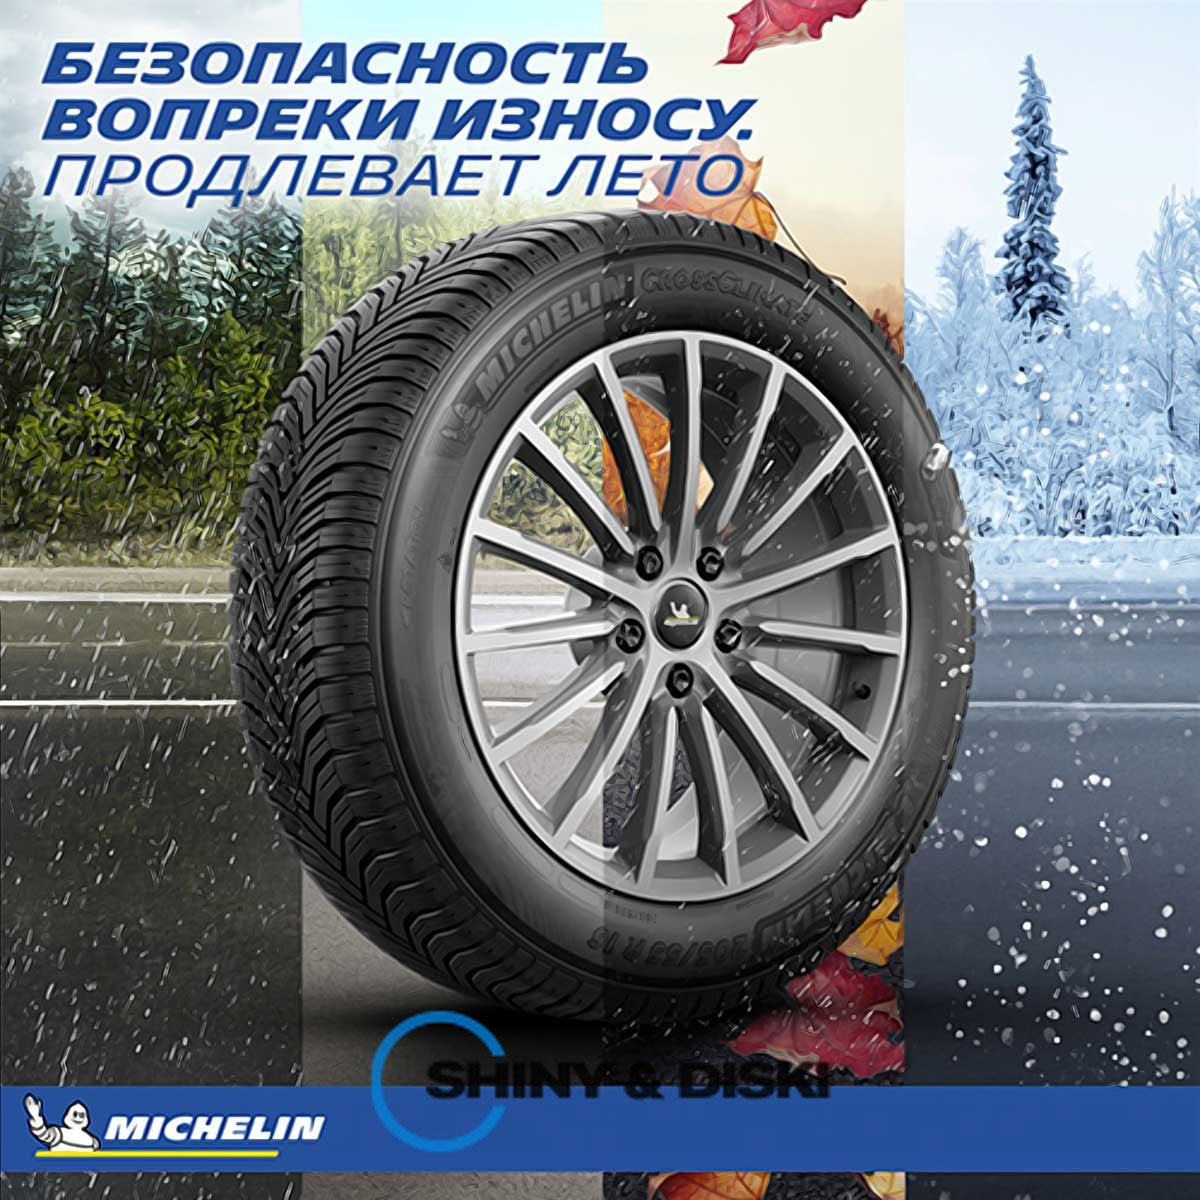 покрышки michelin cross climate+ 185/60 r15 88v xl